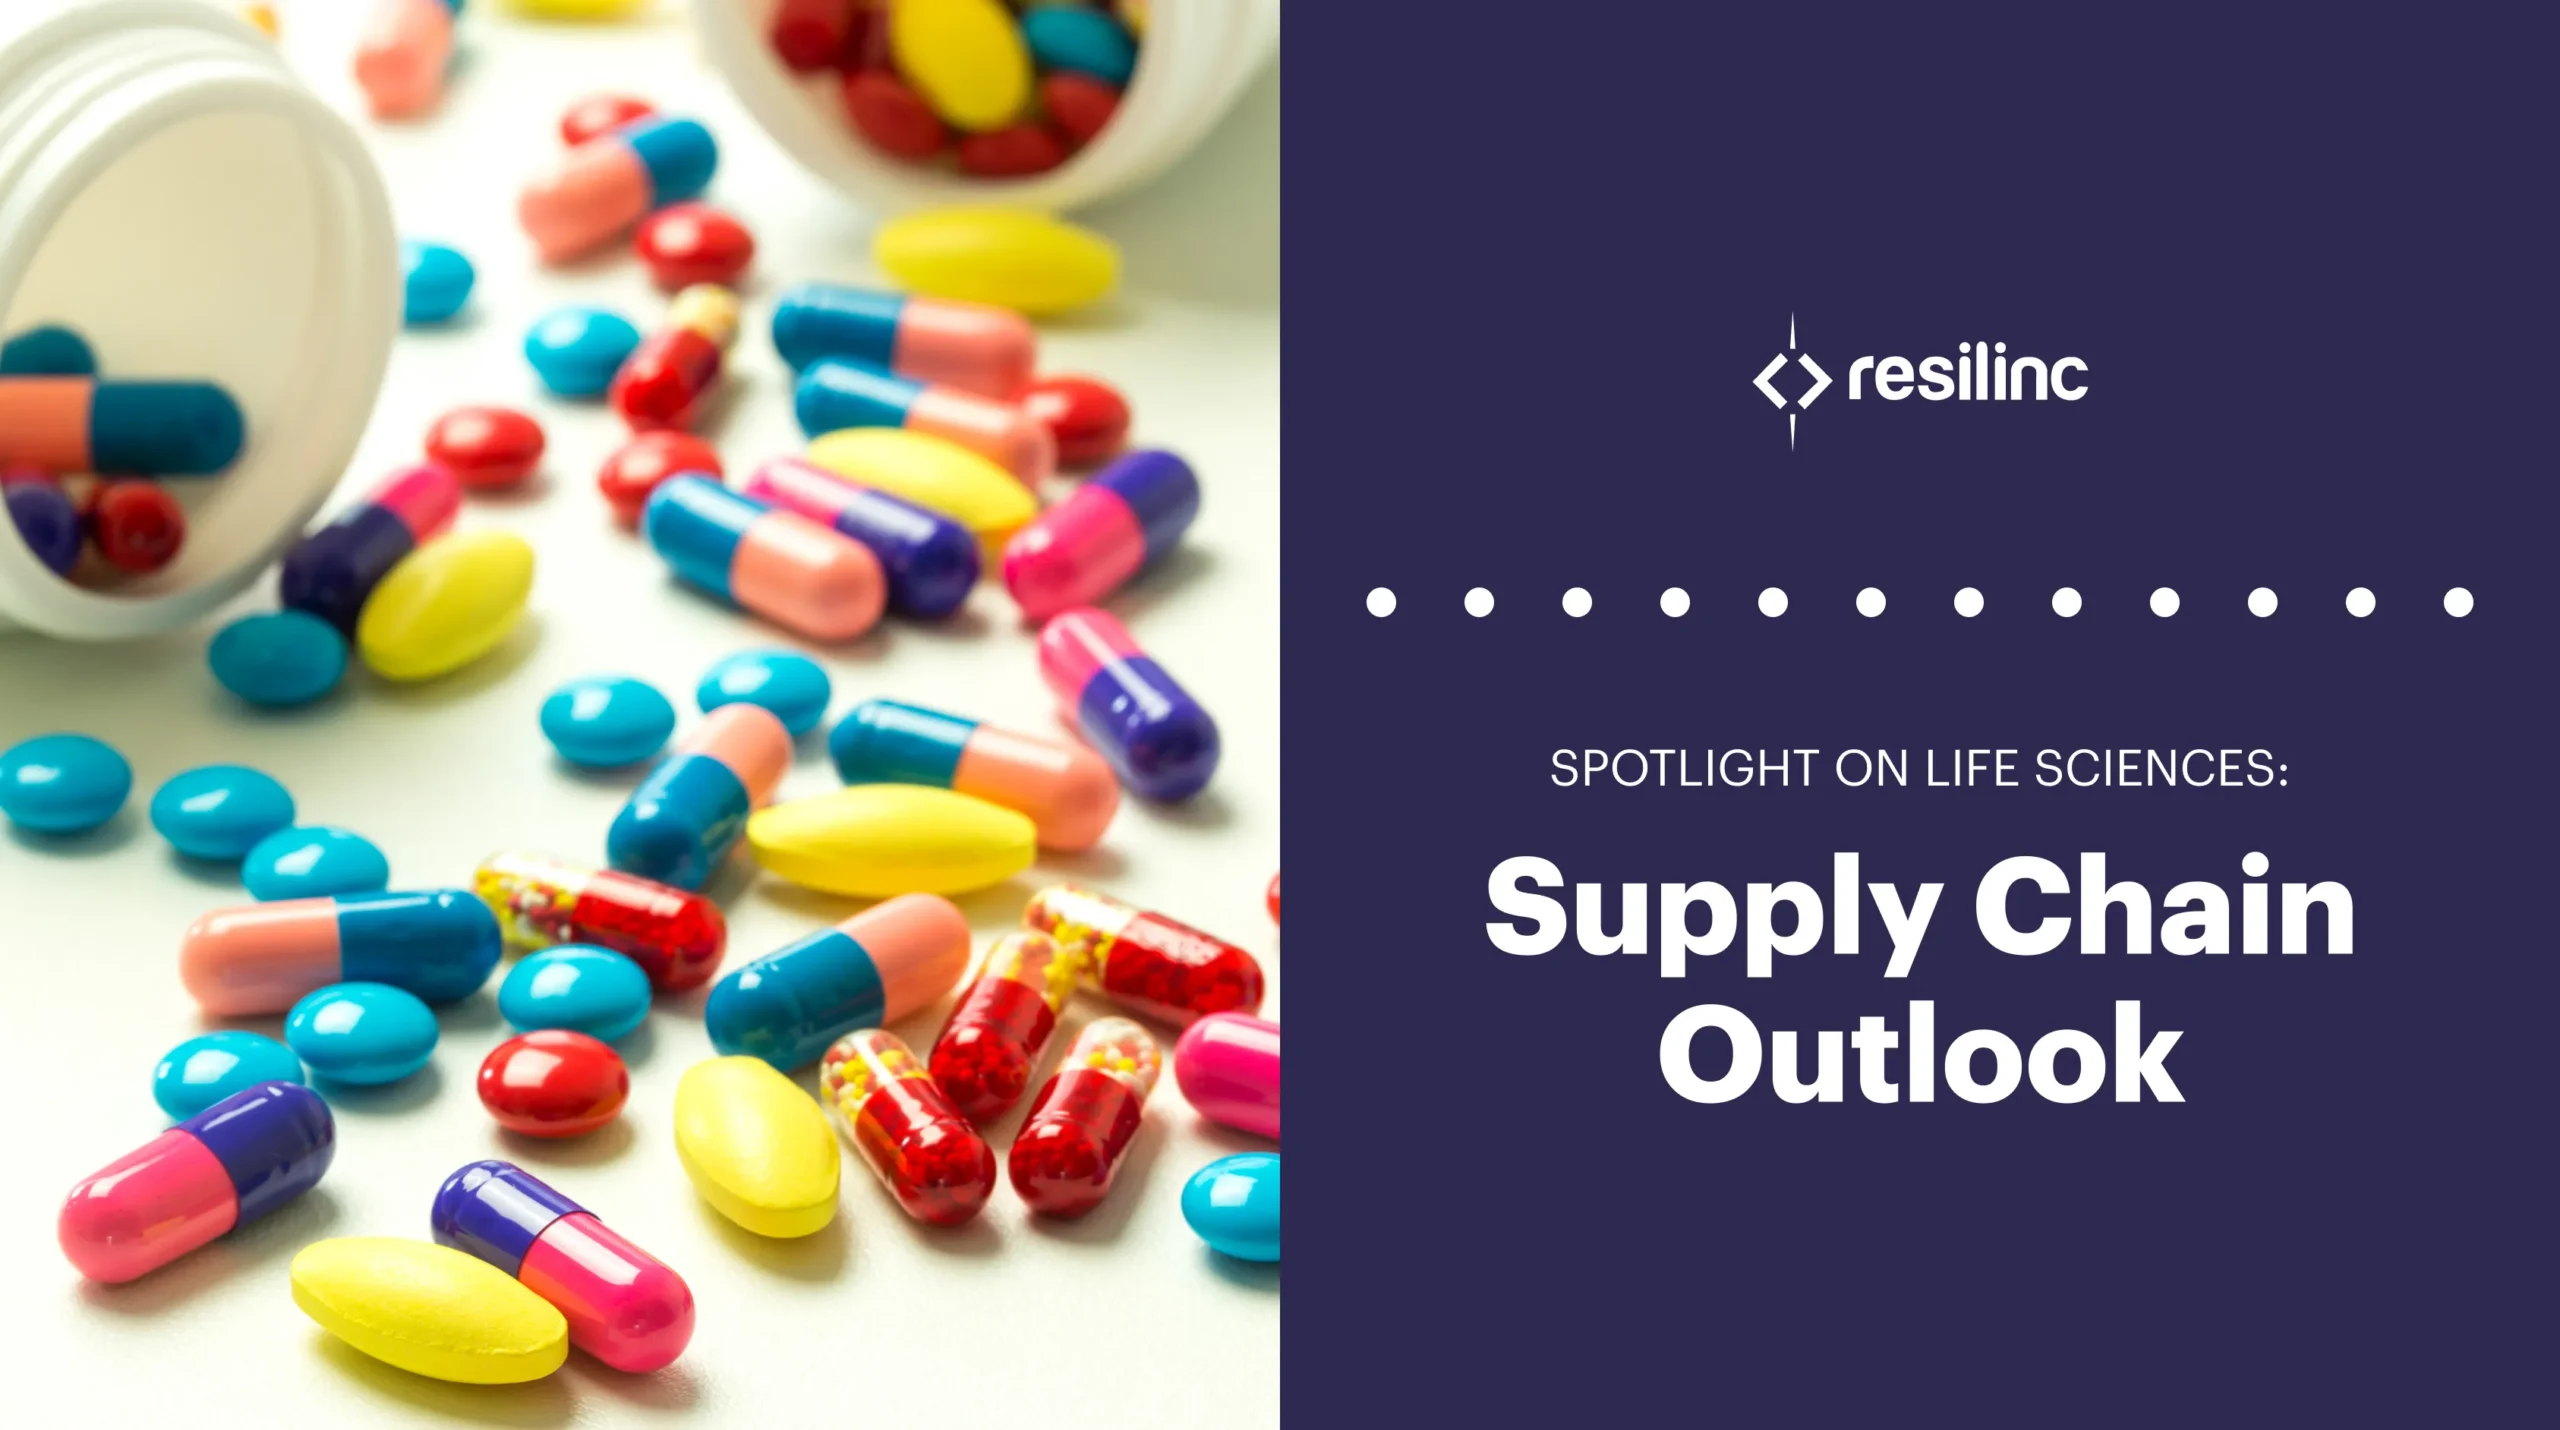 Spotlight on Life Sciences: Supply Chain Outlook